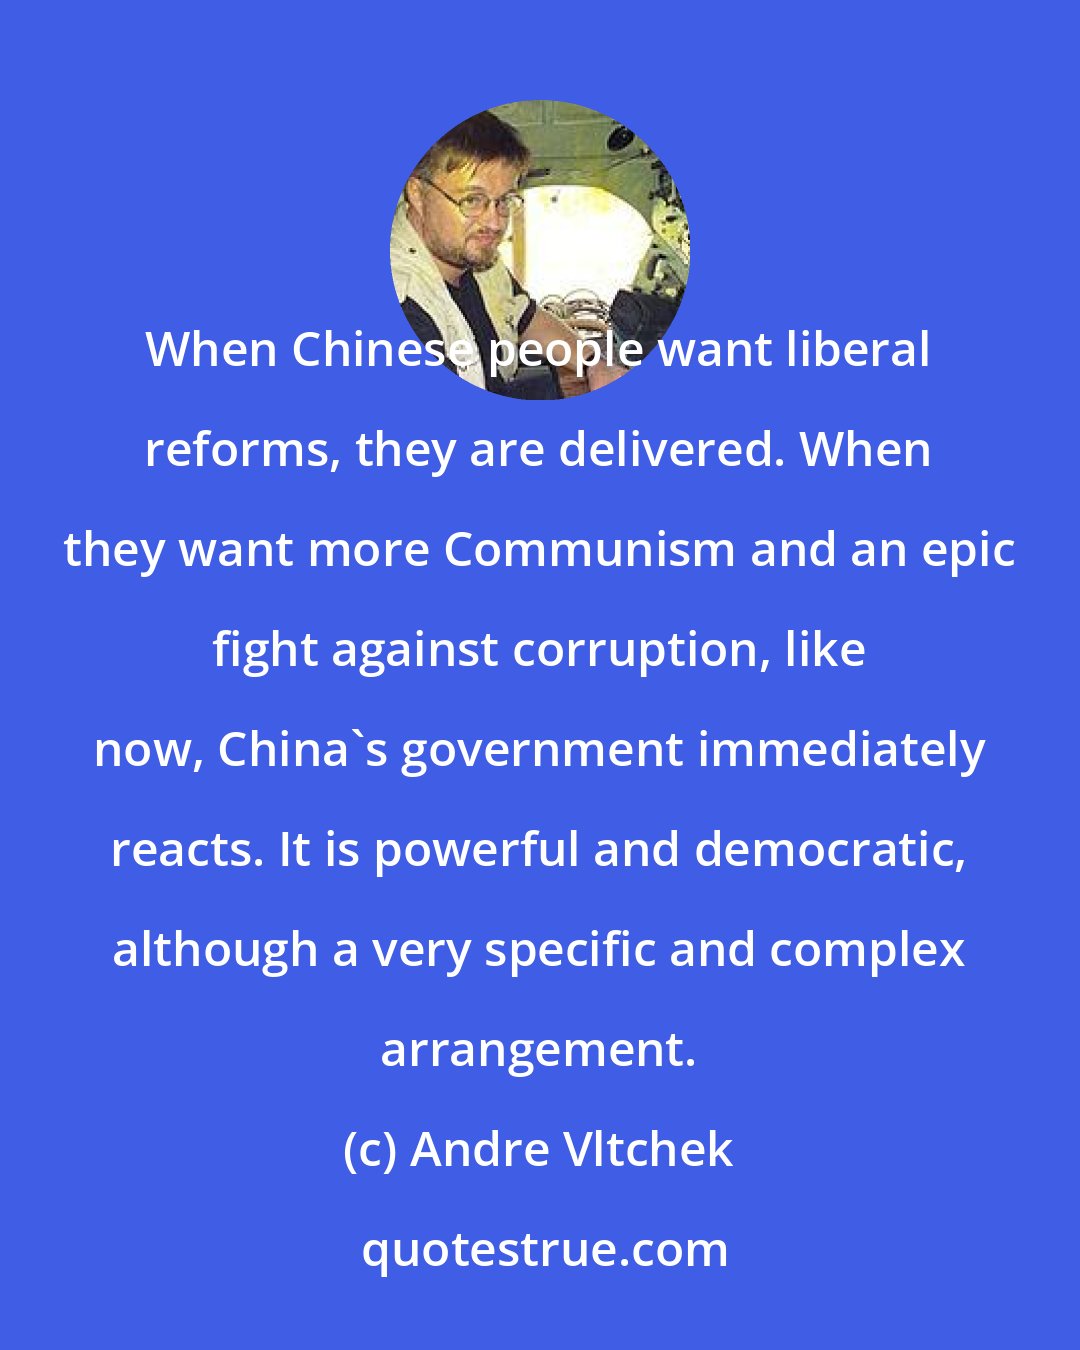 Andre Vltchek: When Chinese people want liberal reforms, they are delivered. When they want more Communism and an epic fight against corruption, like now, China's government immediately reacts. It is powerful and democratic, although a very specific and complex arrangement.